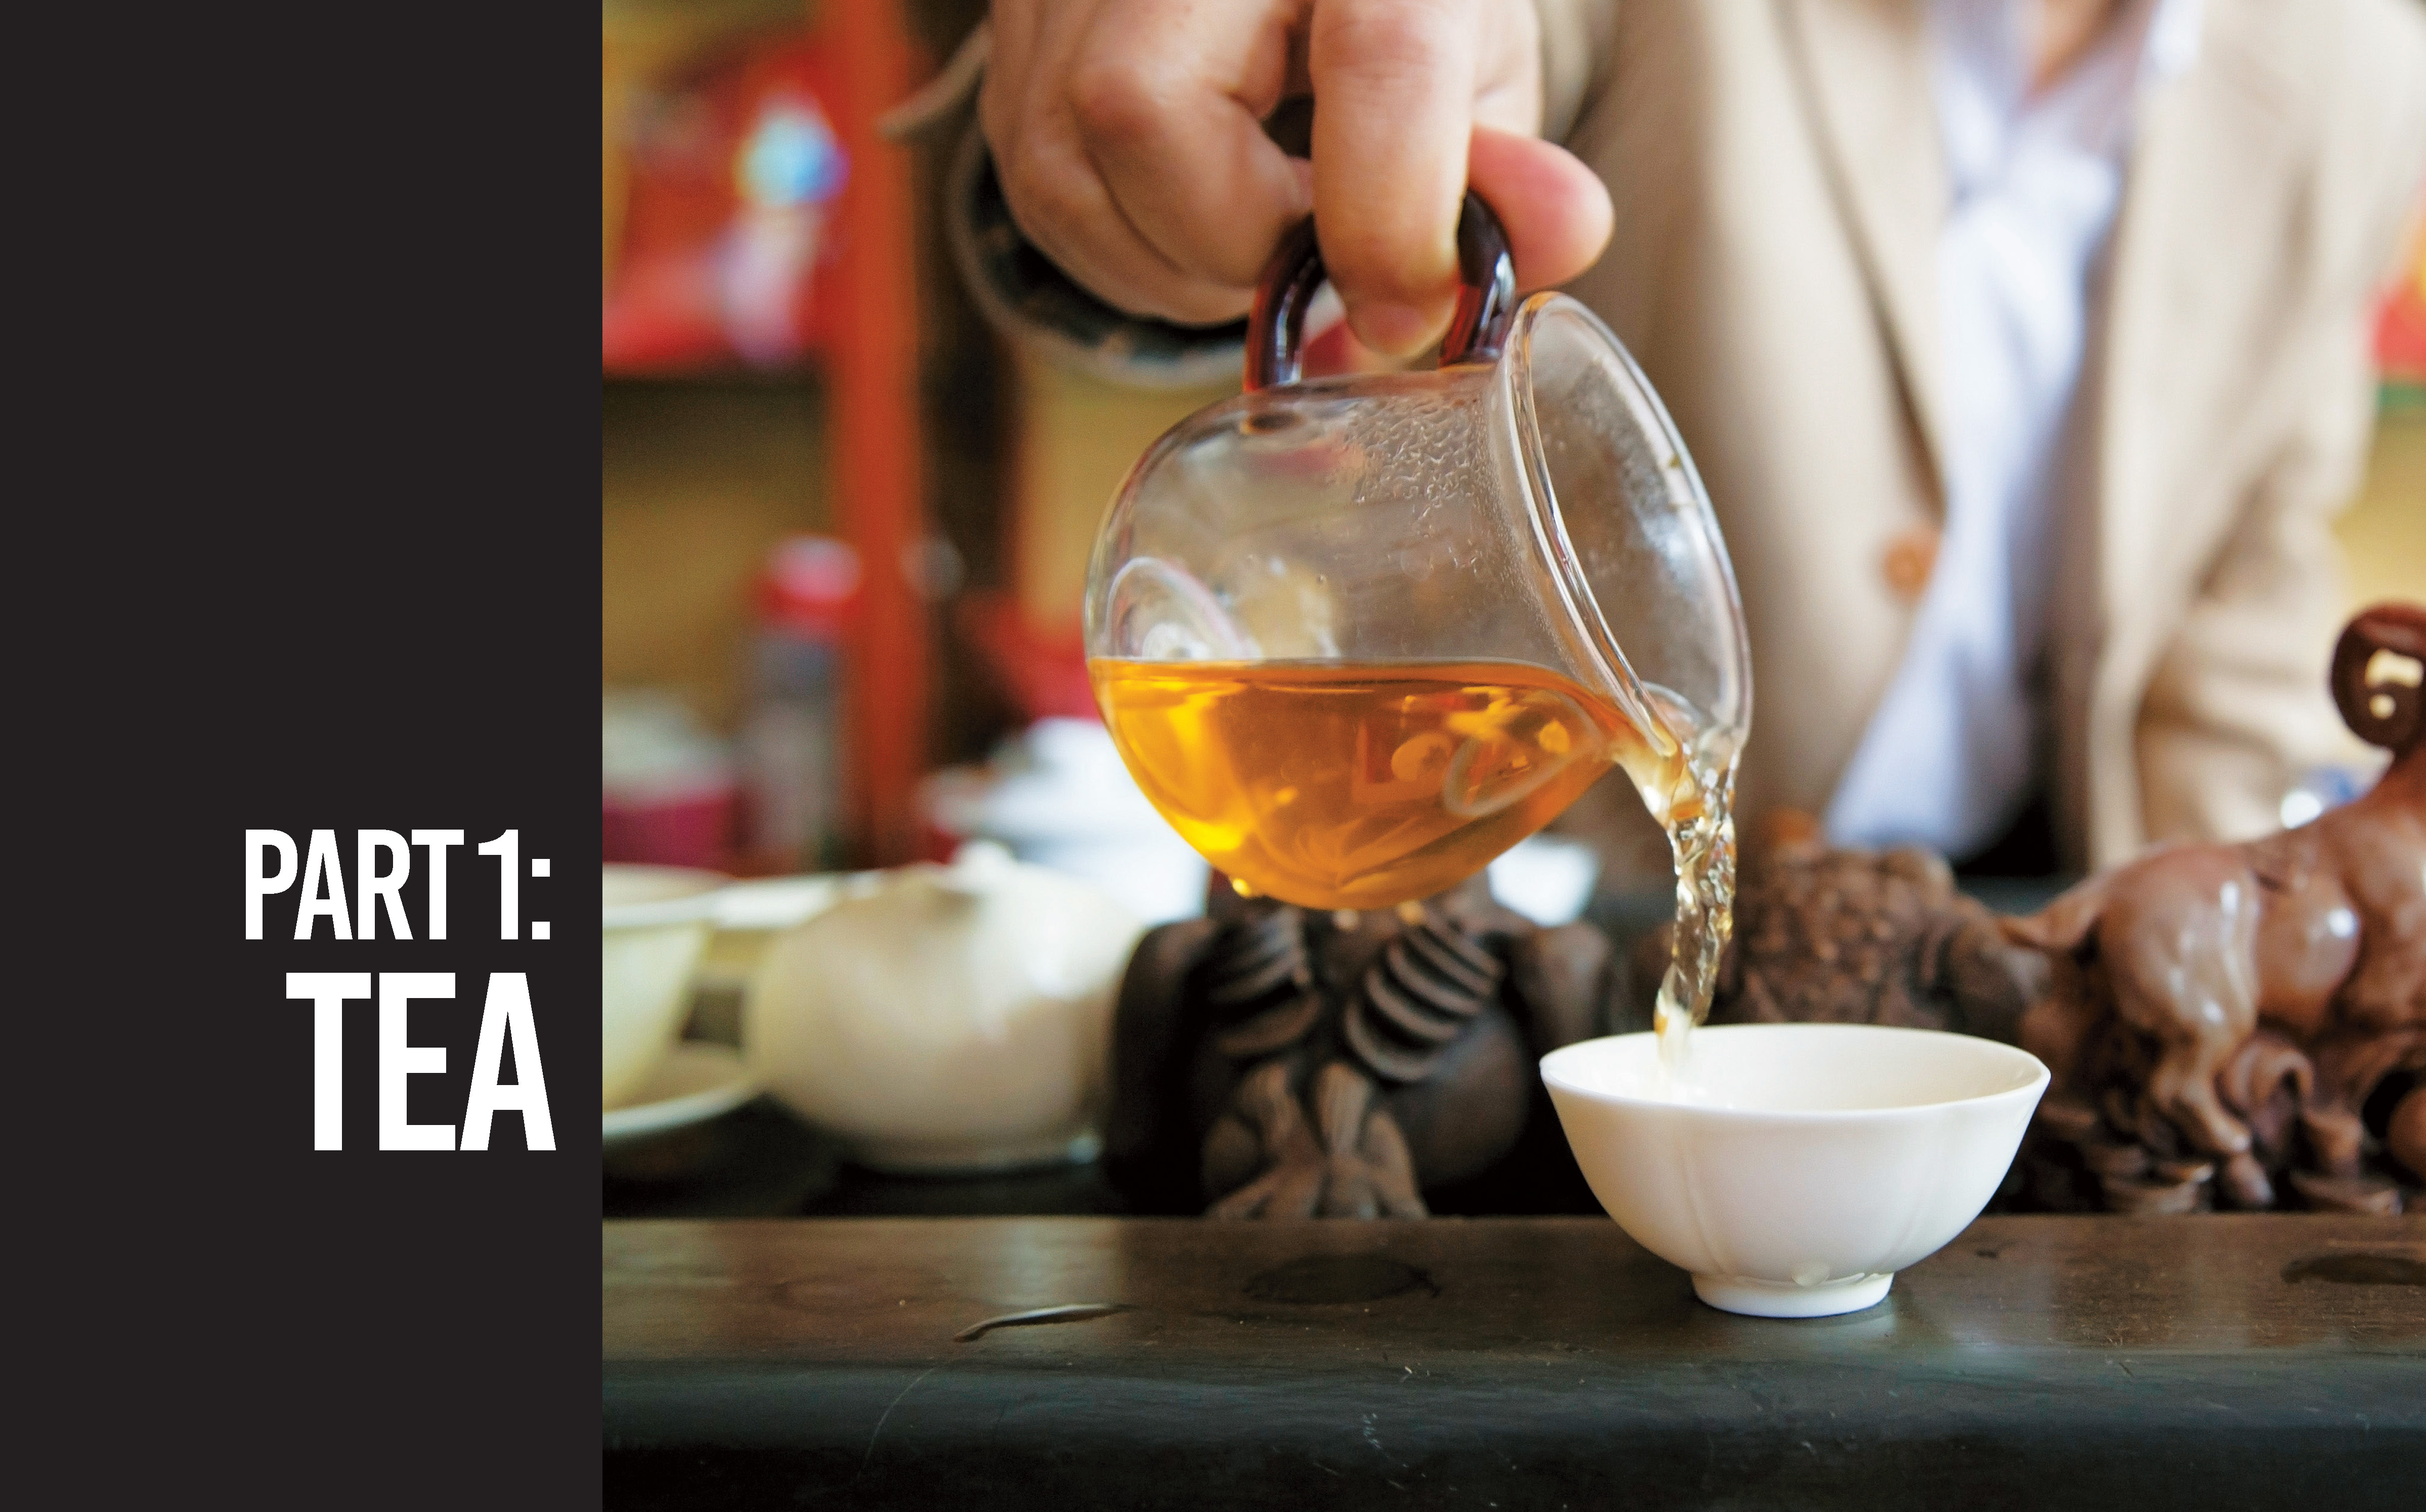 The Art and Craft of Tea